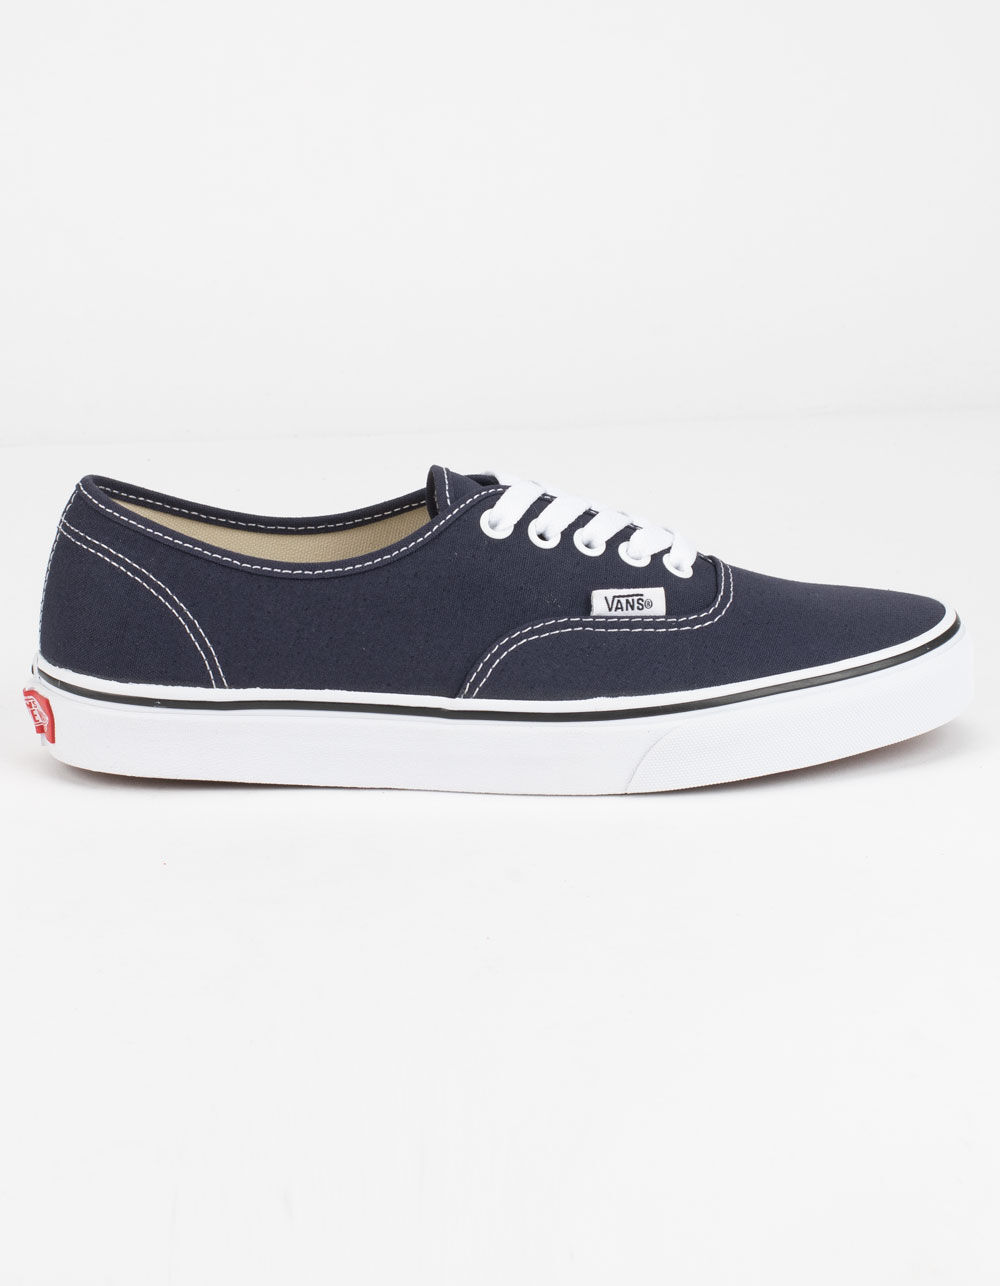 VANS Authentic Night Sky & True White Shoes image number 0